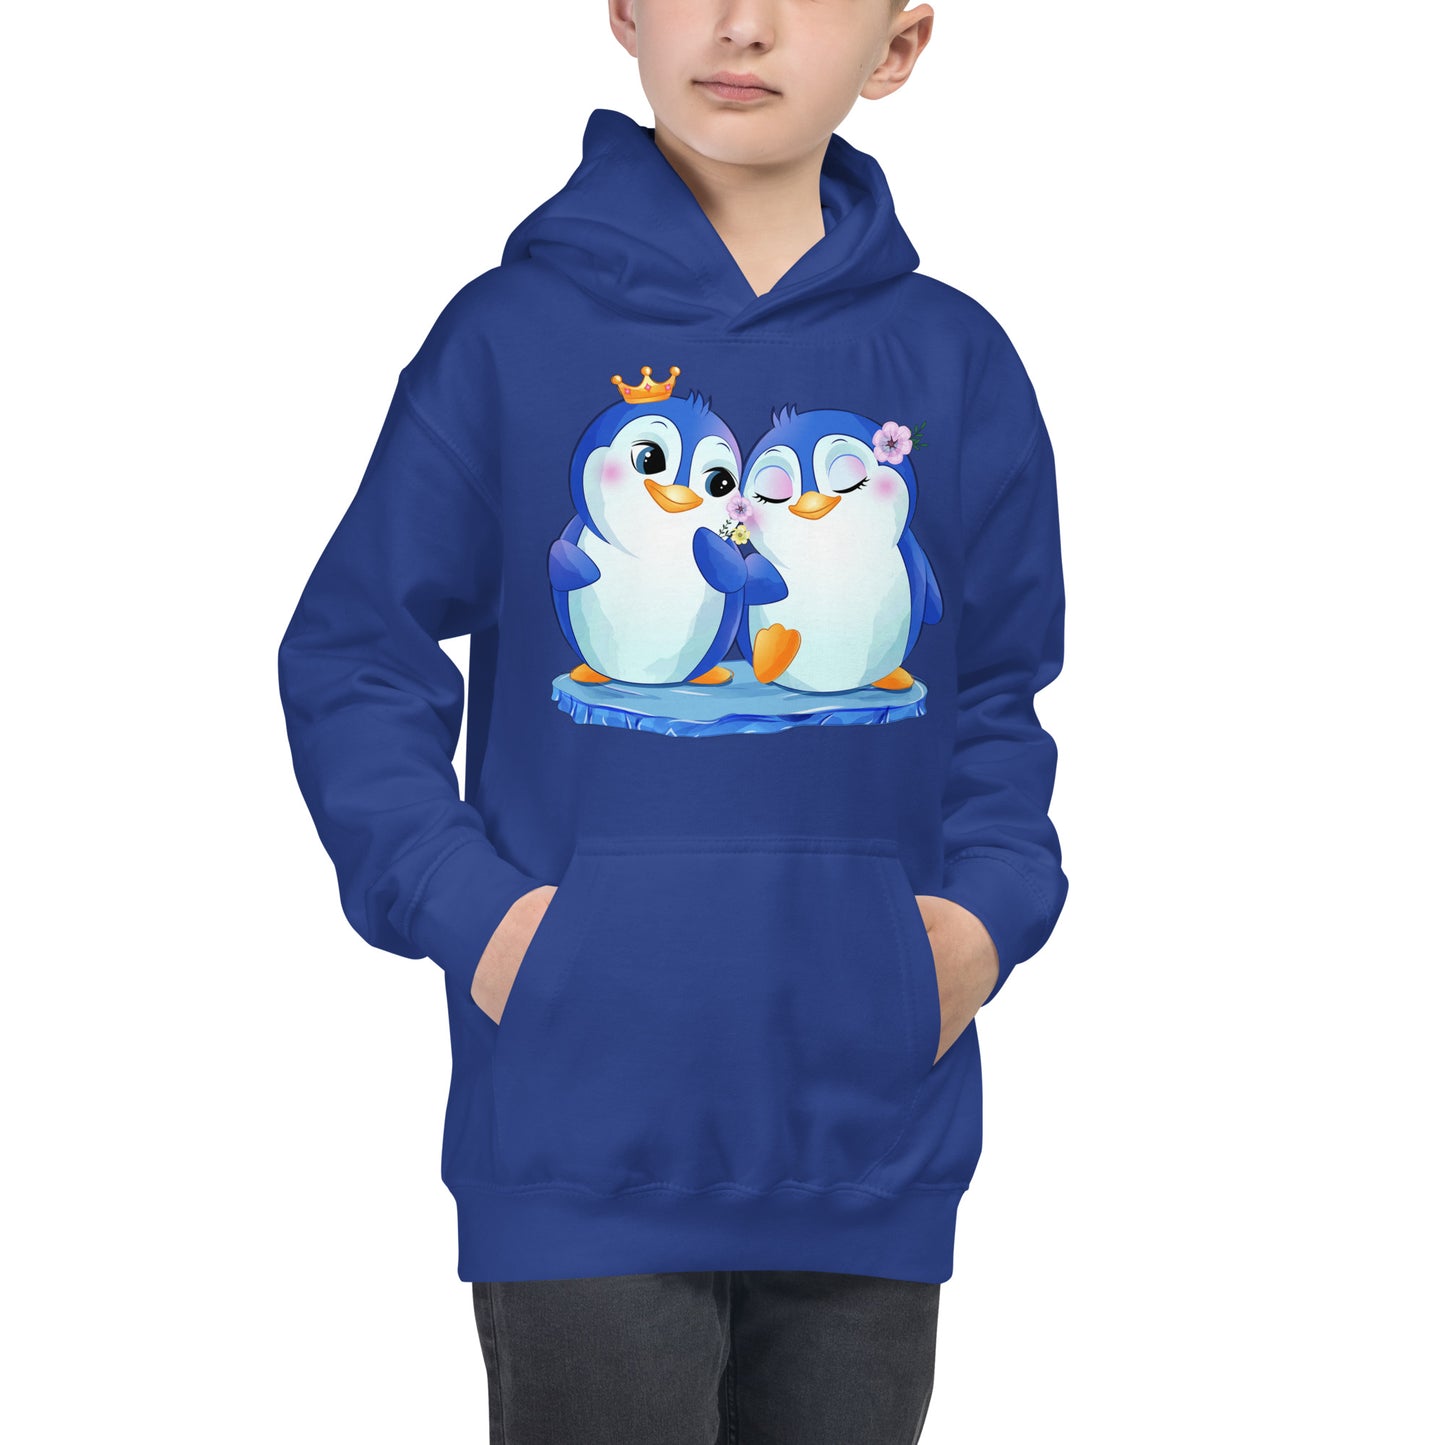 Two Penguins Hoodie, No. 0092